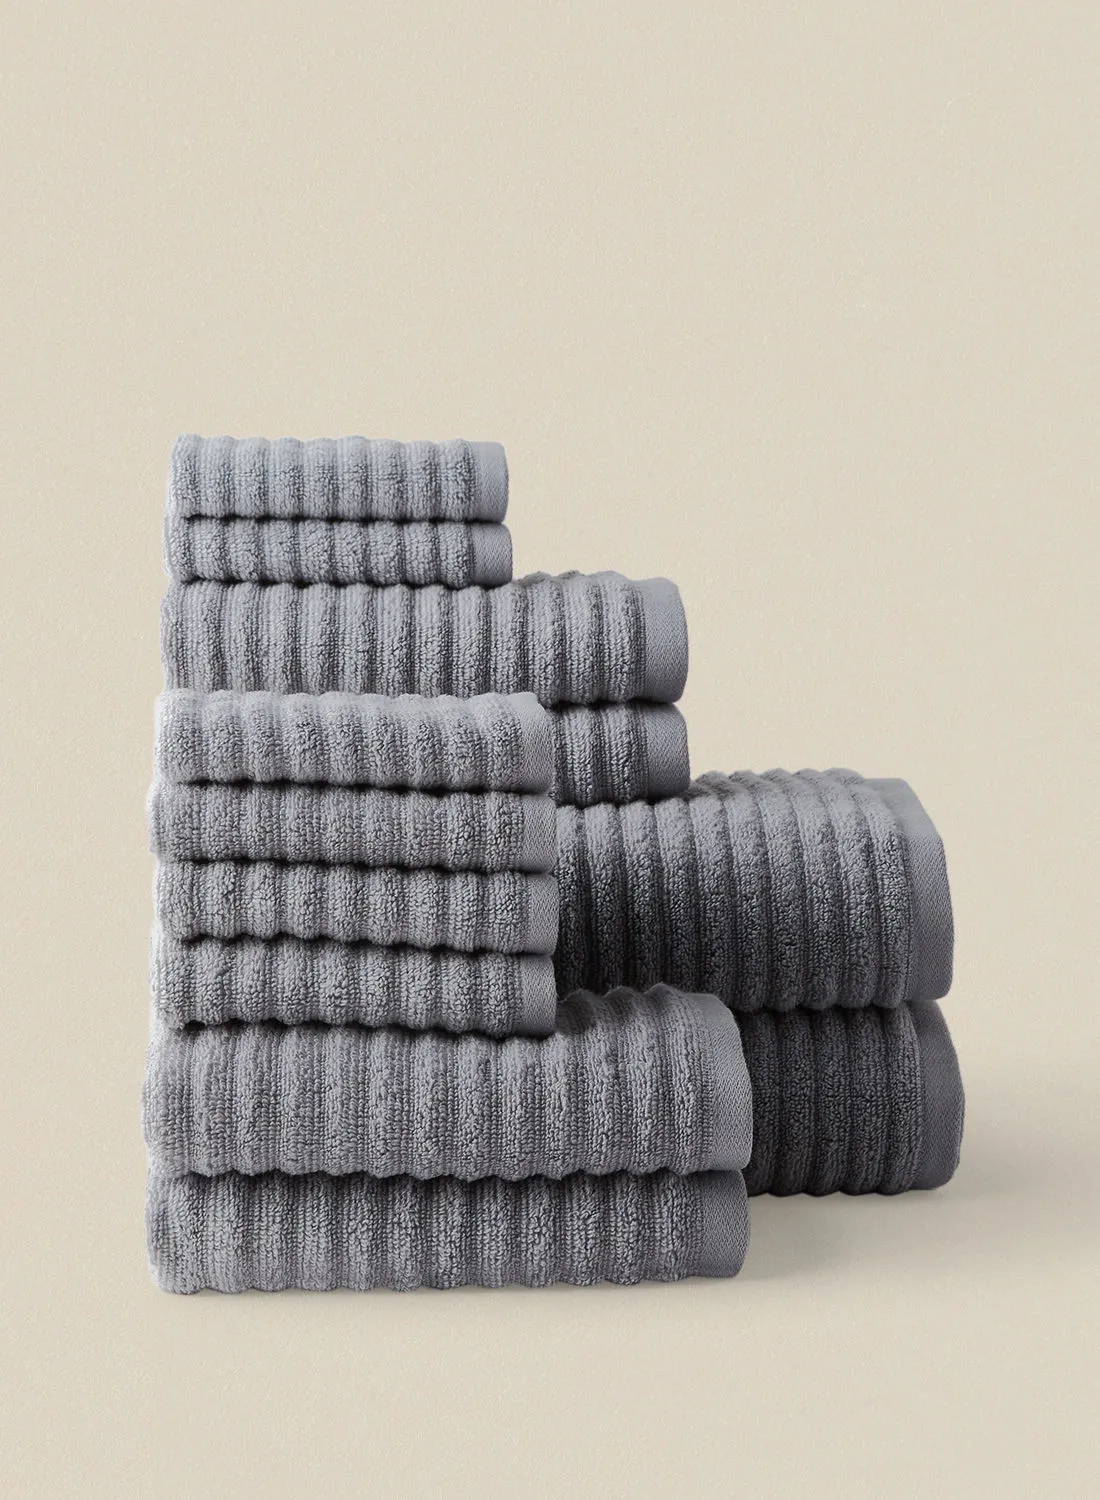 noon east 12 Piece Bathroom Towel Set - 450 GSM 100% Cotton Ribbed - 4 Hand Towel - 6 Face Towel - 2 Bath Towel - Mountain Grey Color - Highly Absorbent - Fast Dry